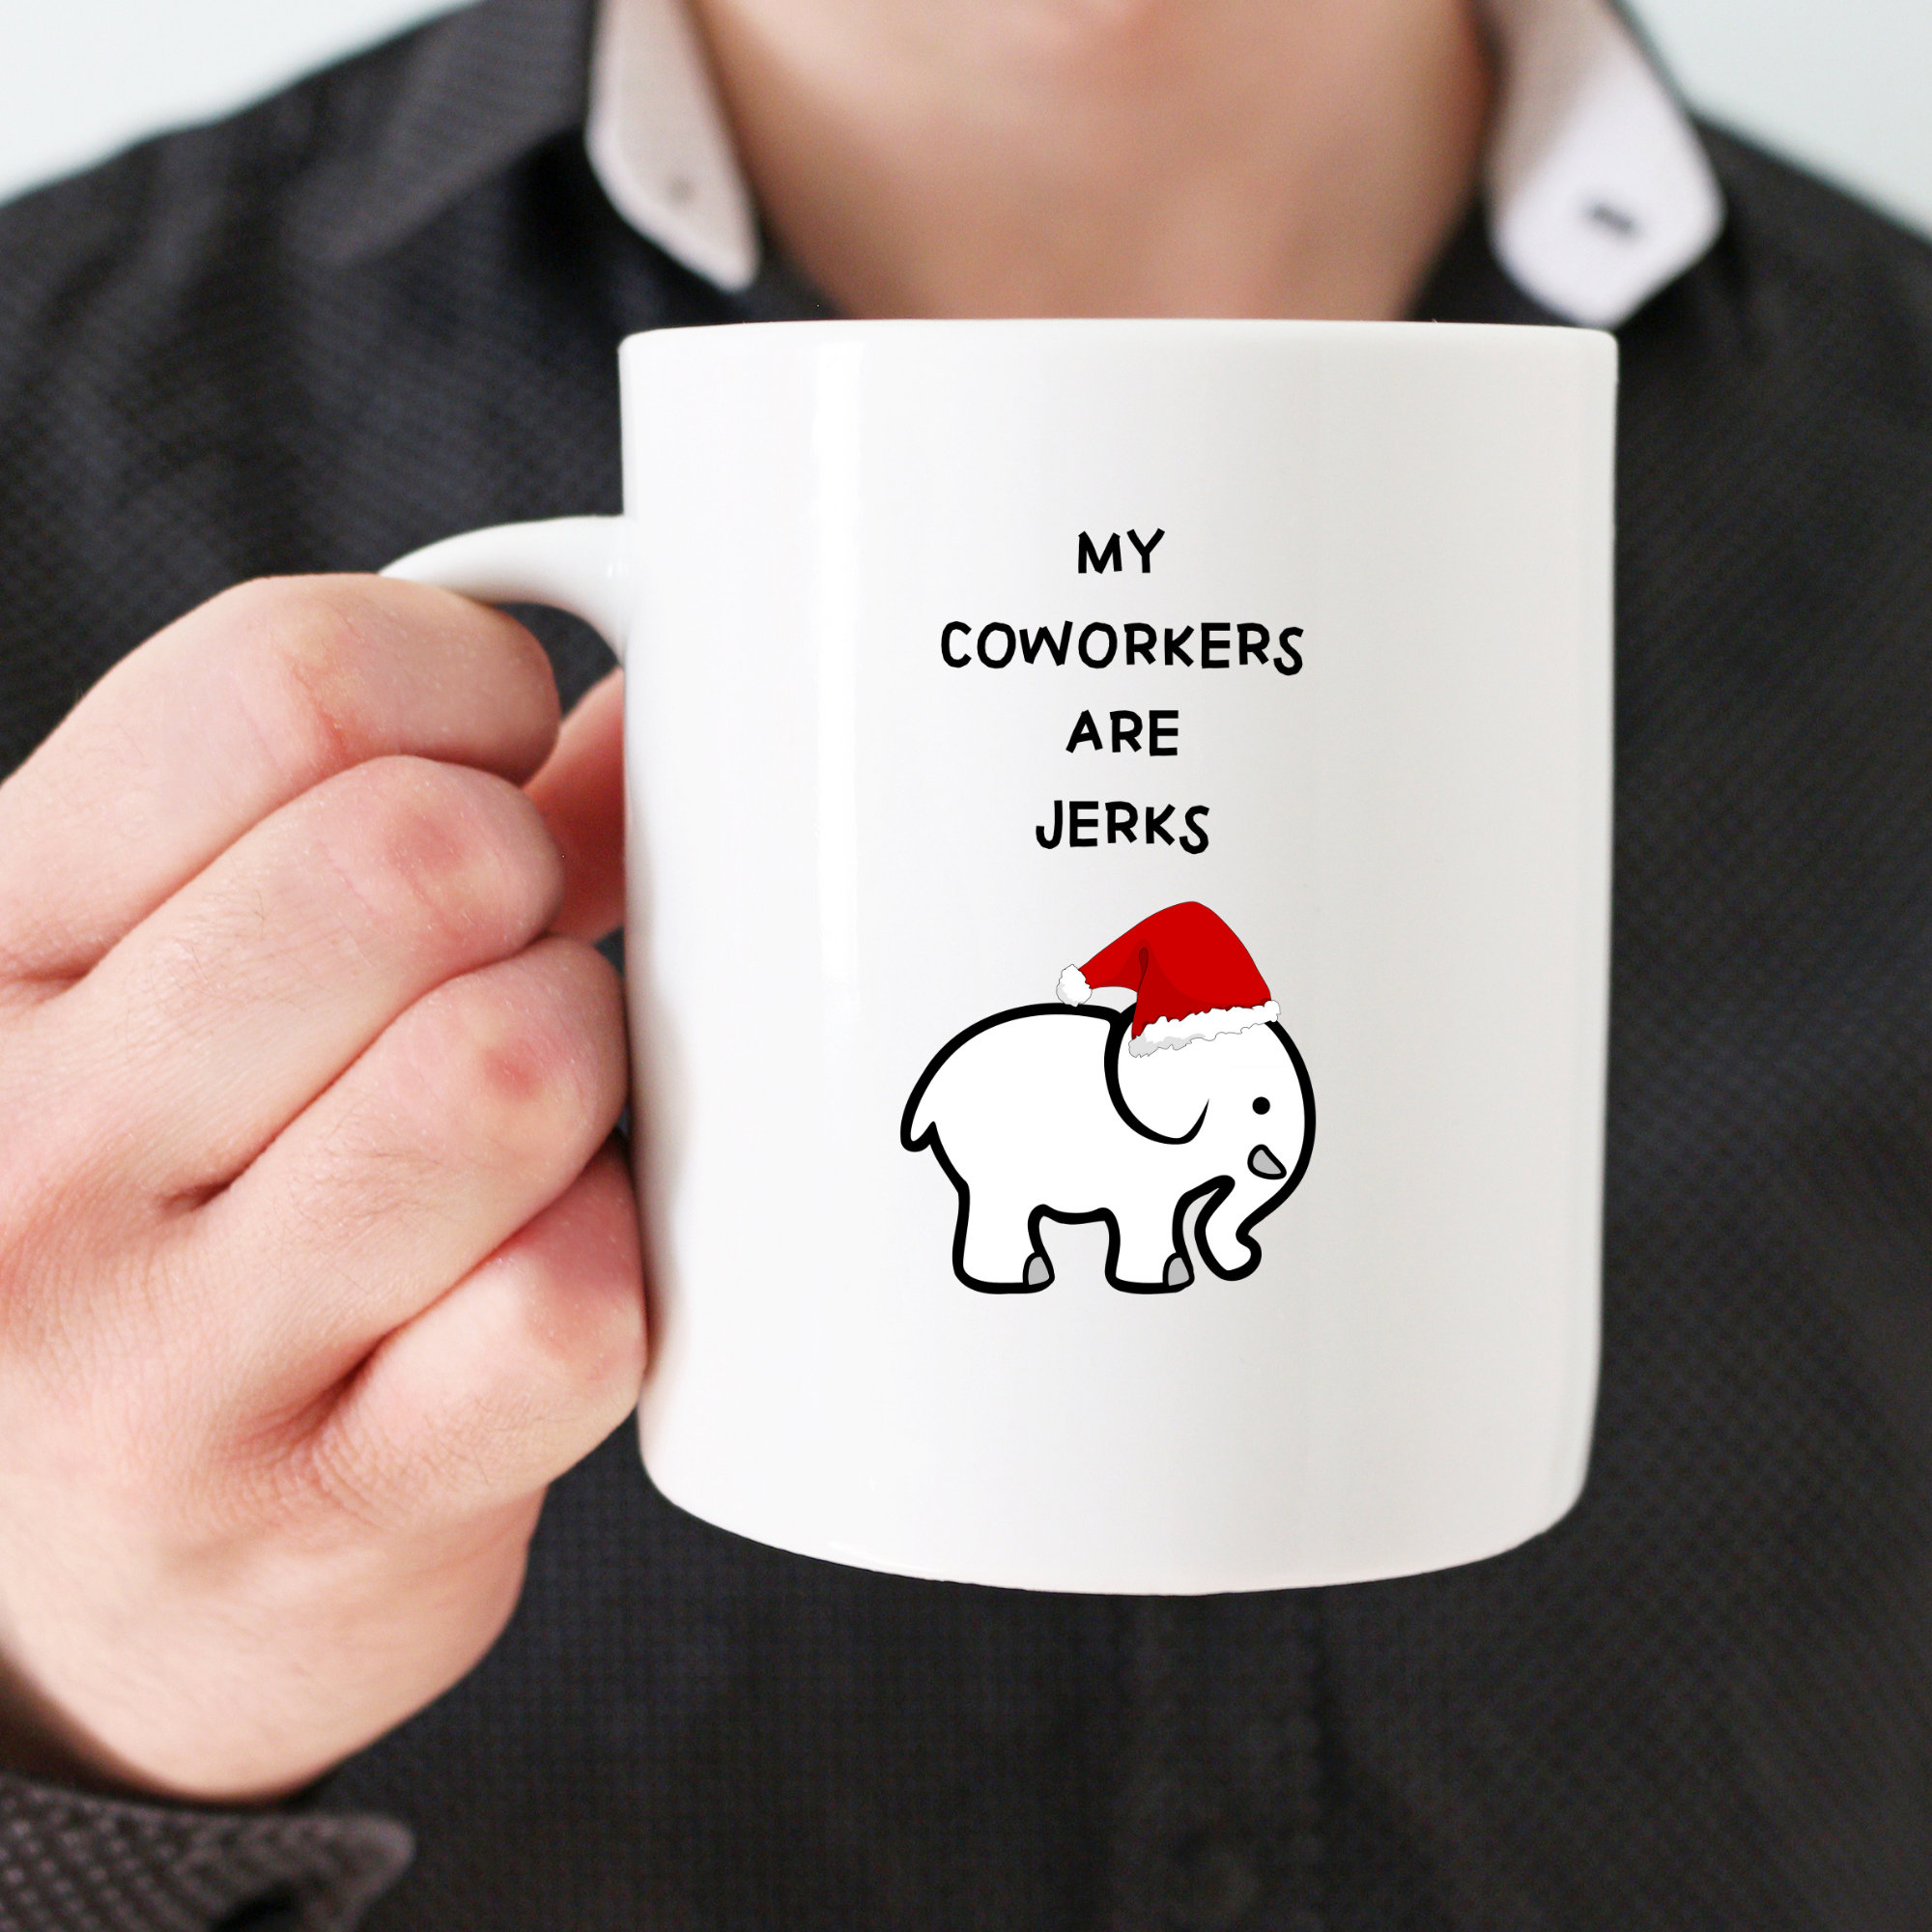 Funny White Elephant Gifts, White Elephant Party Gift Exchange Ideas,  Coworker Coffee Mug